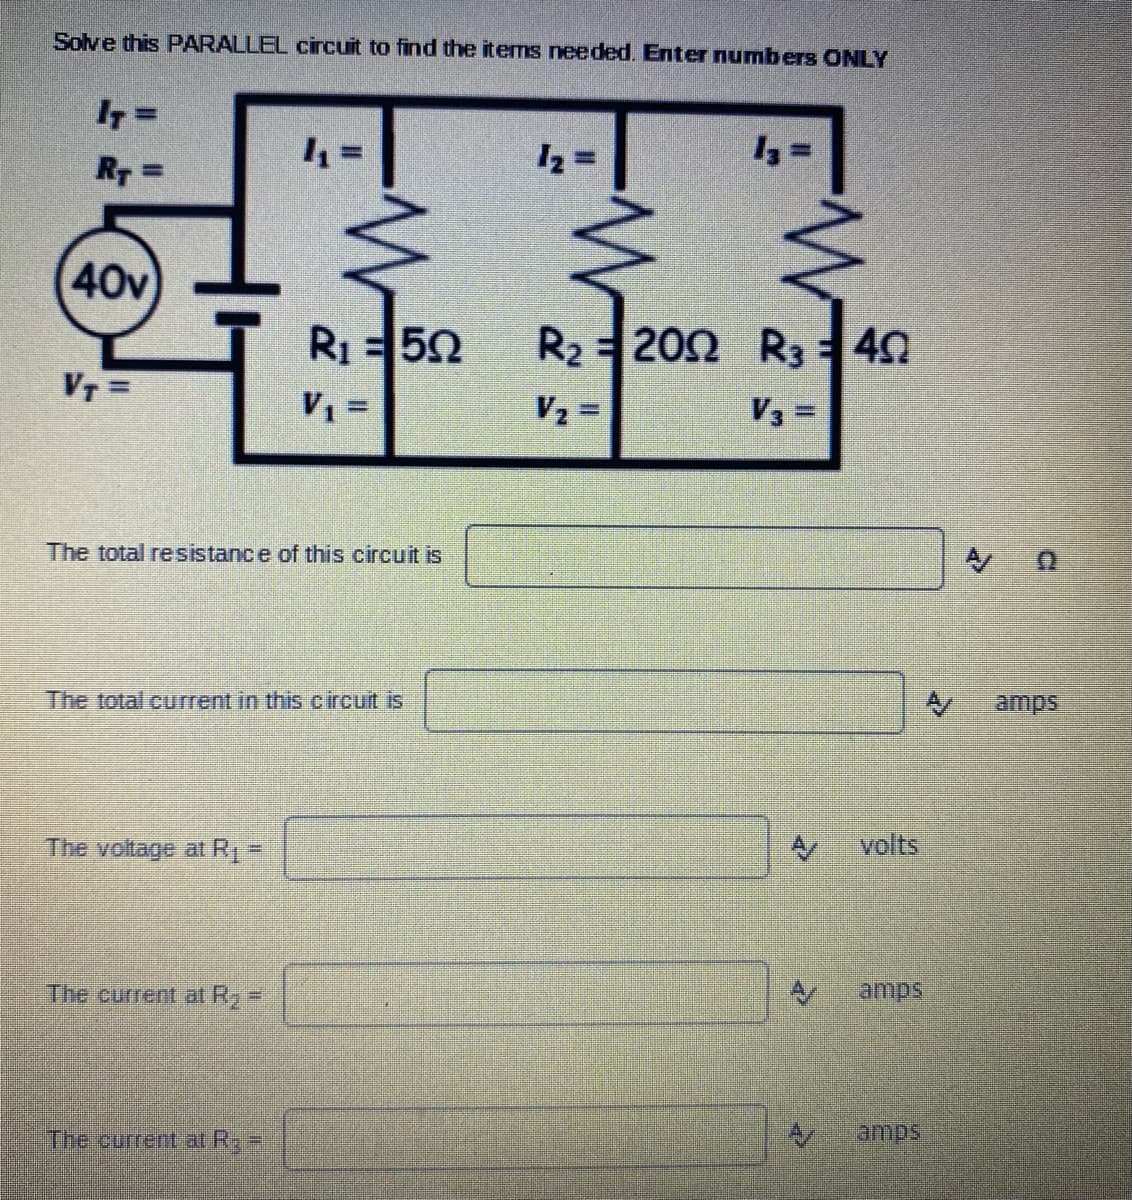 Solve this PARALLEL circuit to find the items needed. Enter numbers ONLY
I7 =
R =
40v
R1=52
R2 202 R3 40
VT =
V2 =
V3 =
The total resistance of this circuit is
The total current in this circuit is
amps
The voltage at R =
volts
The current at R, =
The curret at R=
